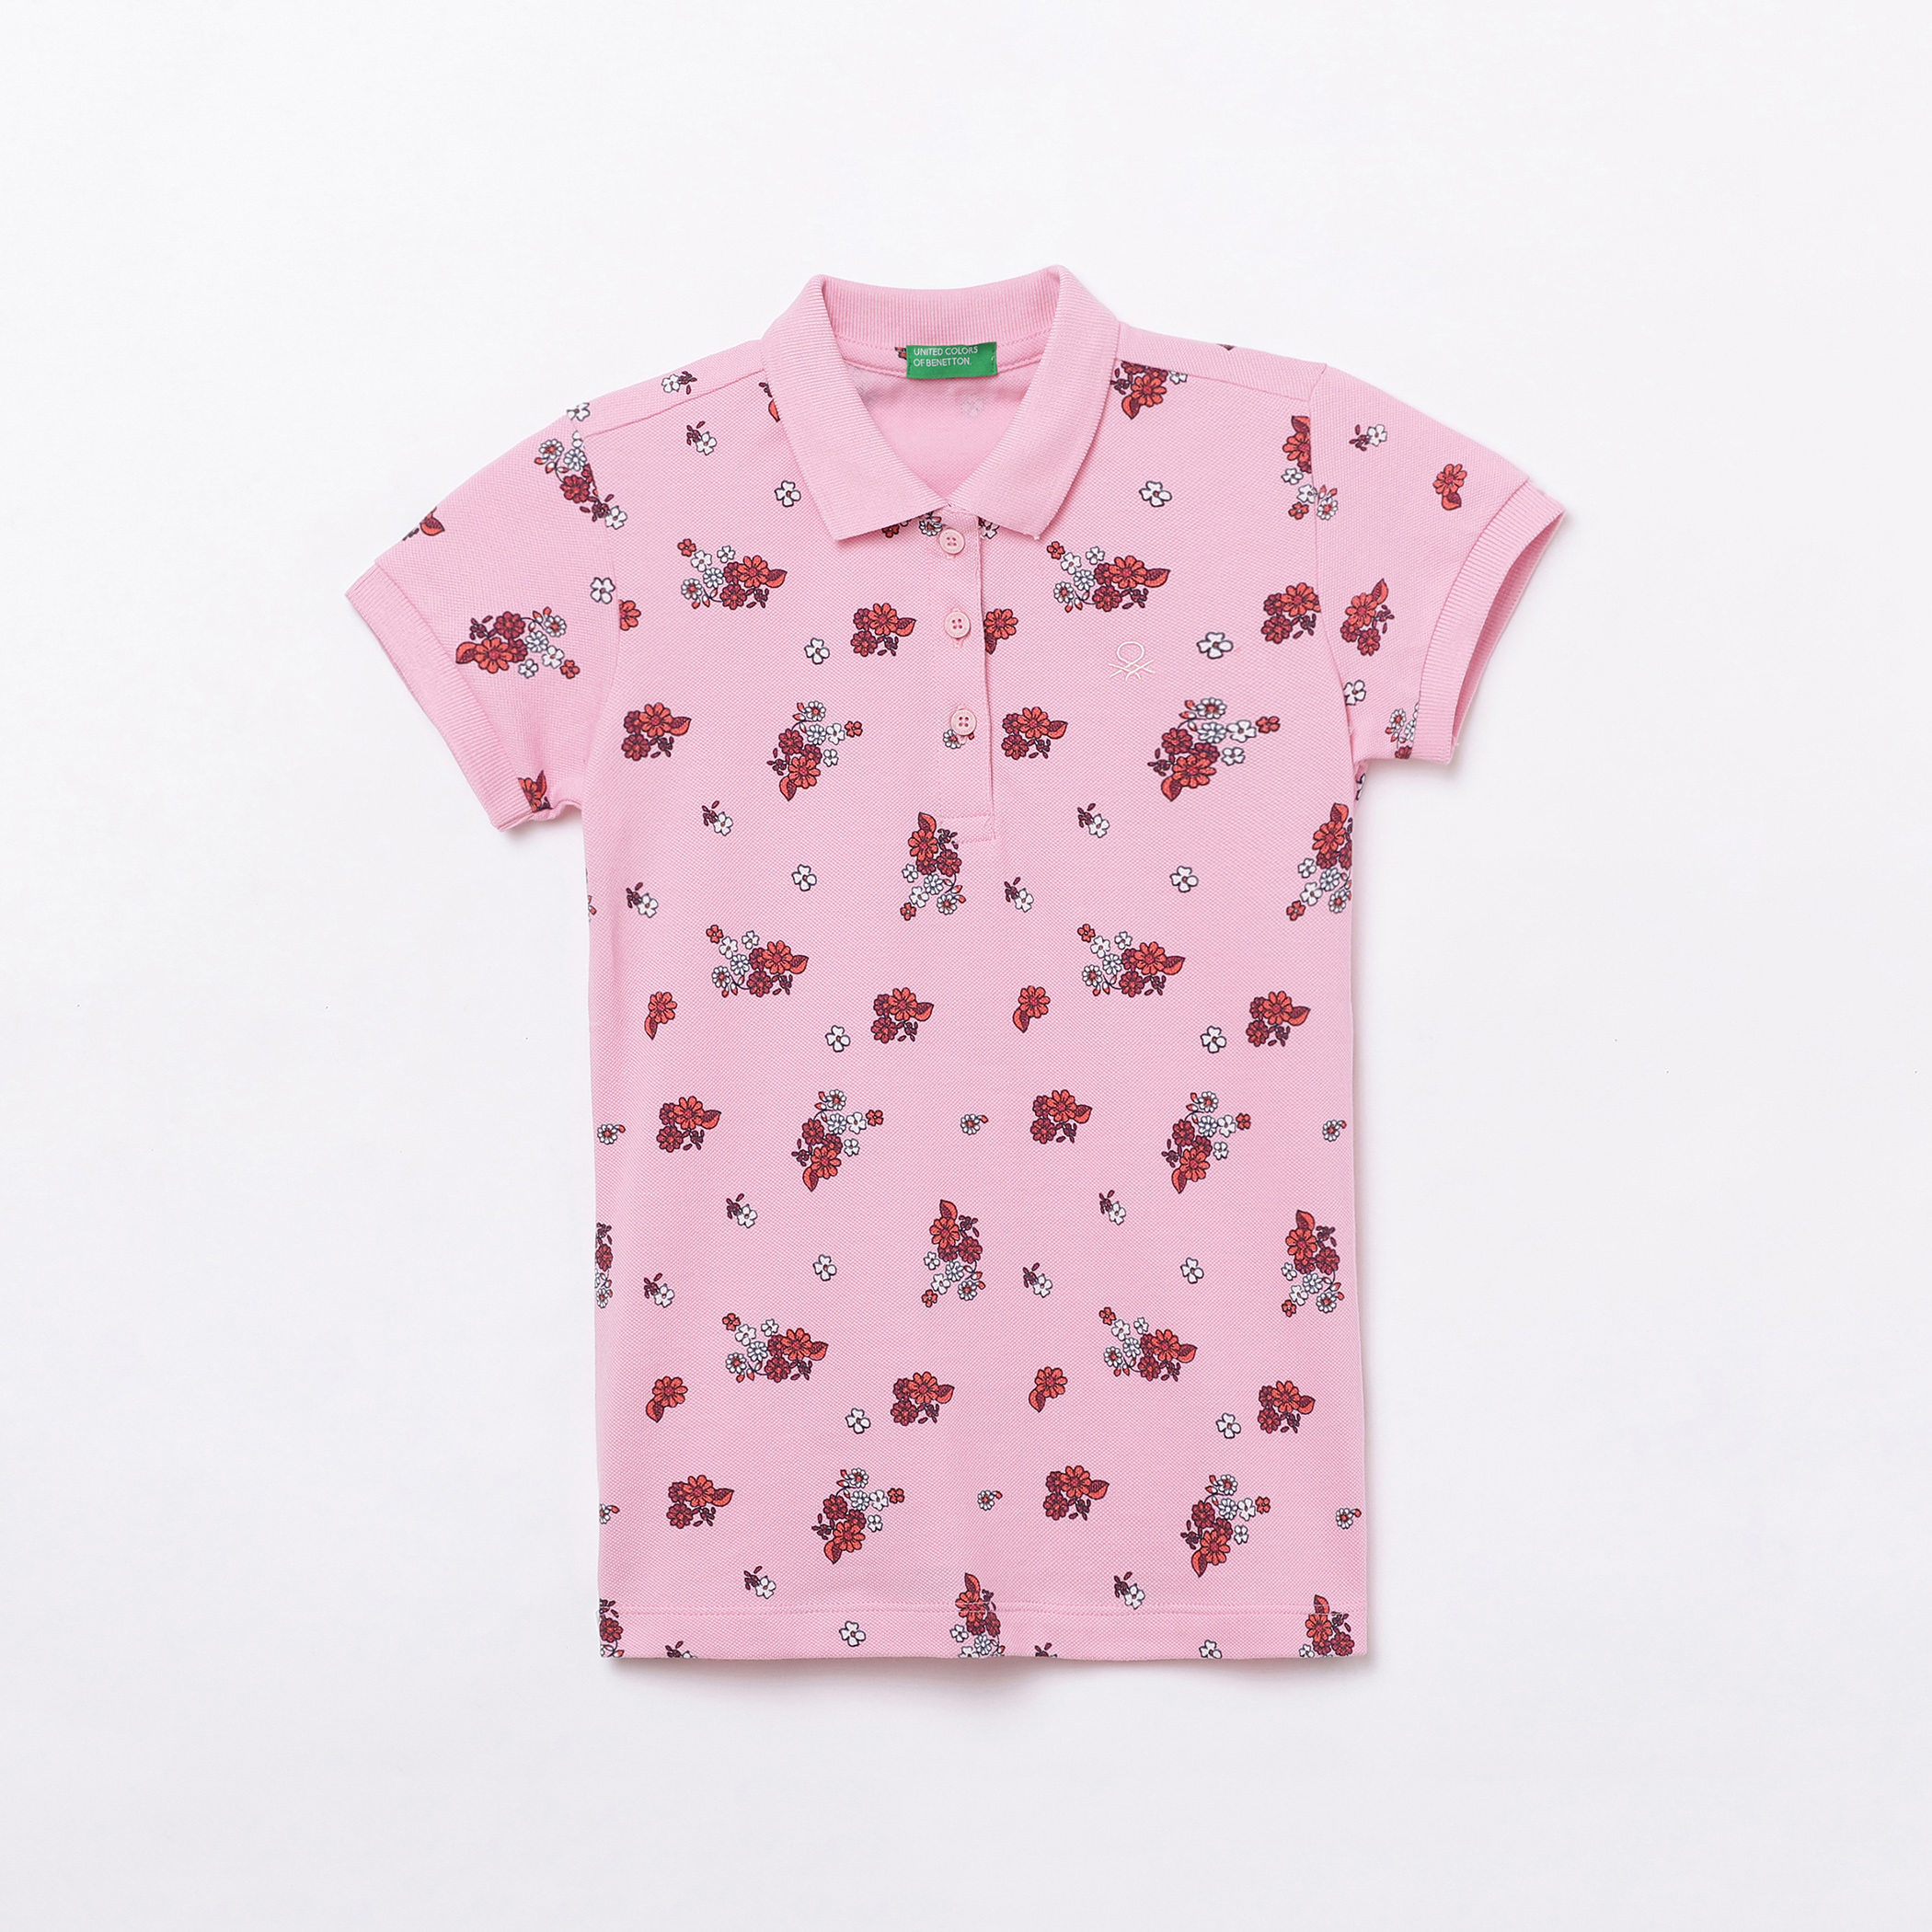 UNITED COLORS OF BENETTON Girls Floral Printed Polo T-shirt